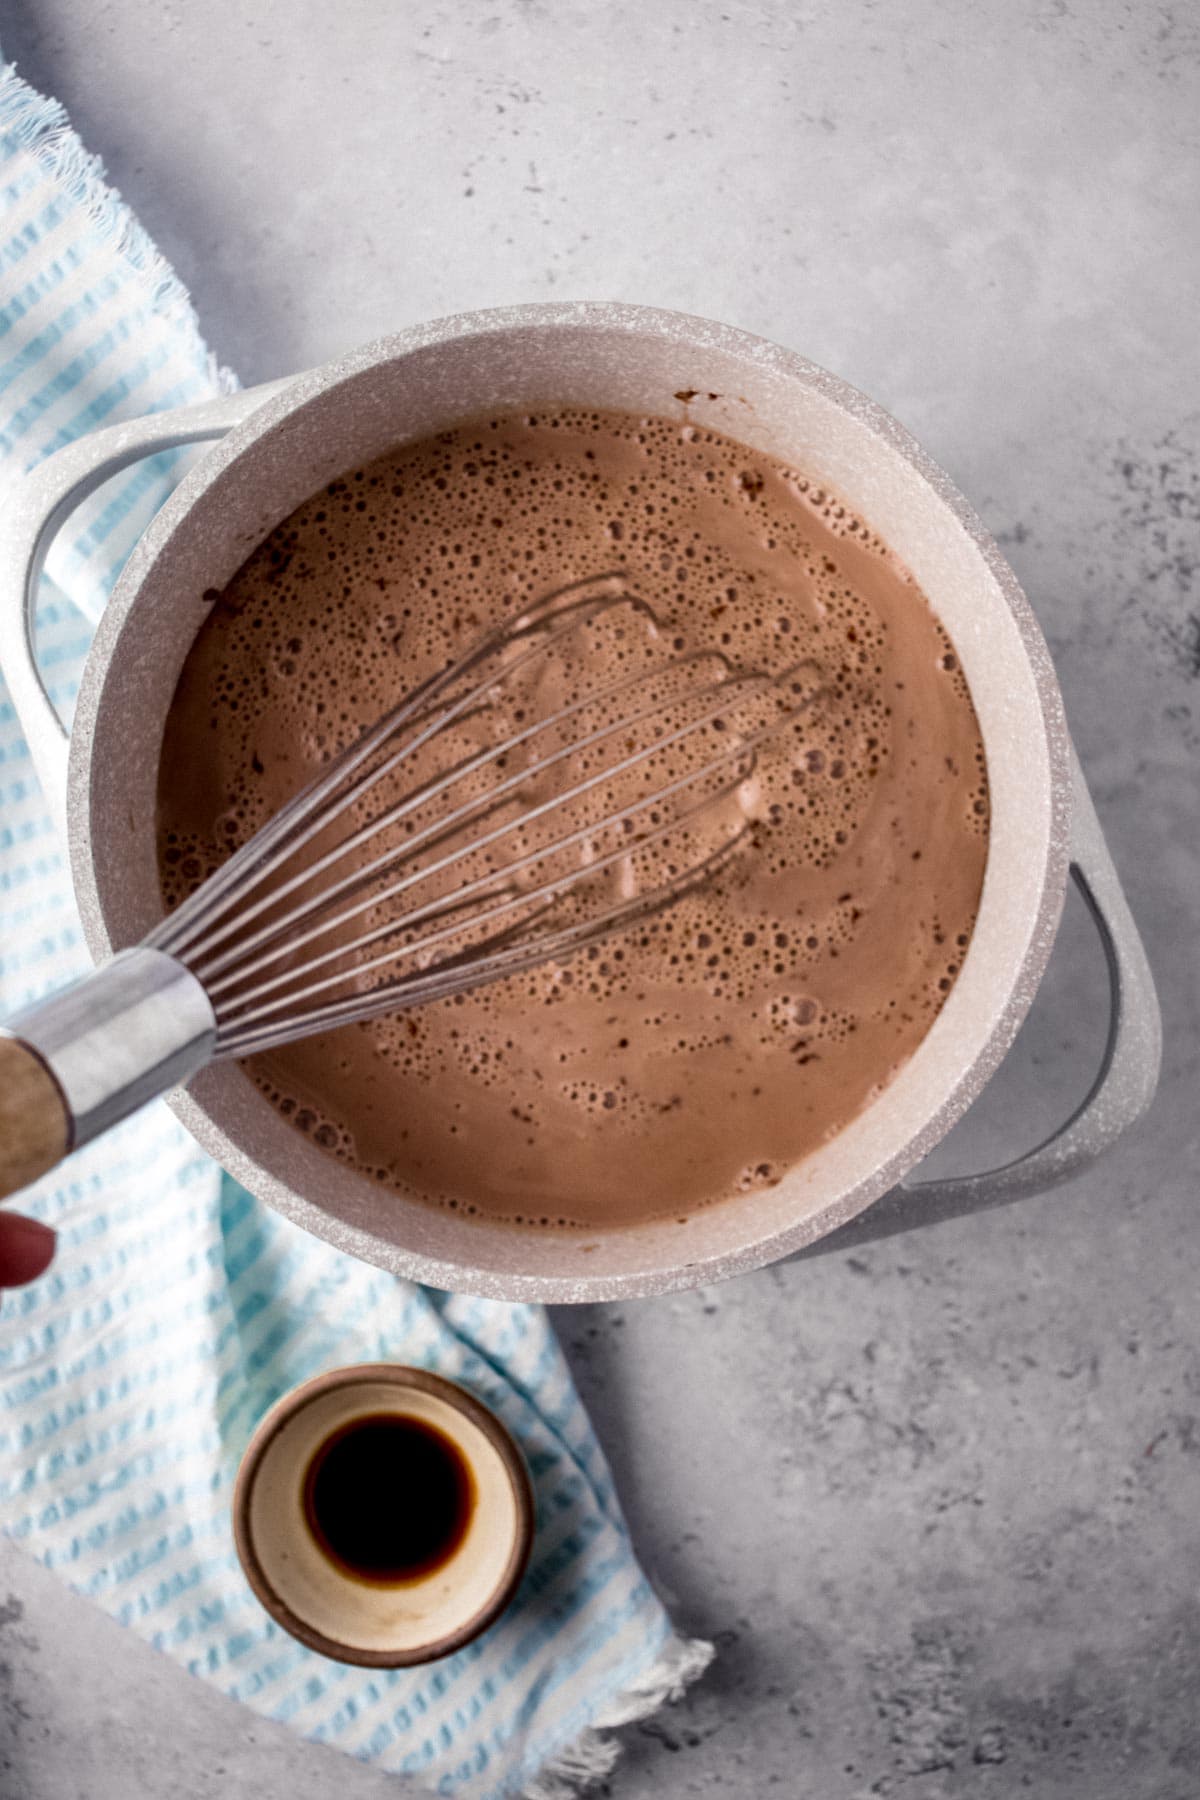 Chocolate Milk whisking chocolate milk in pan with small bowl of vanilla on side